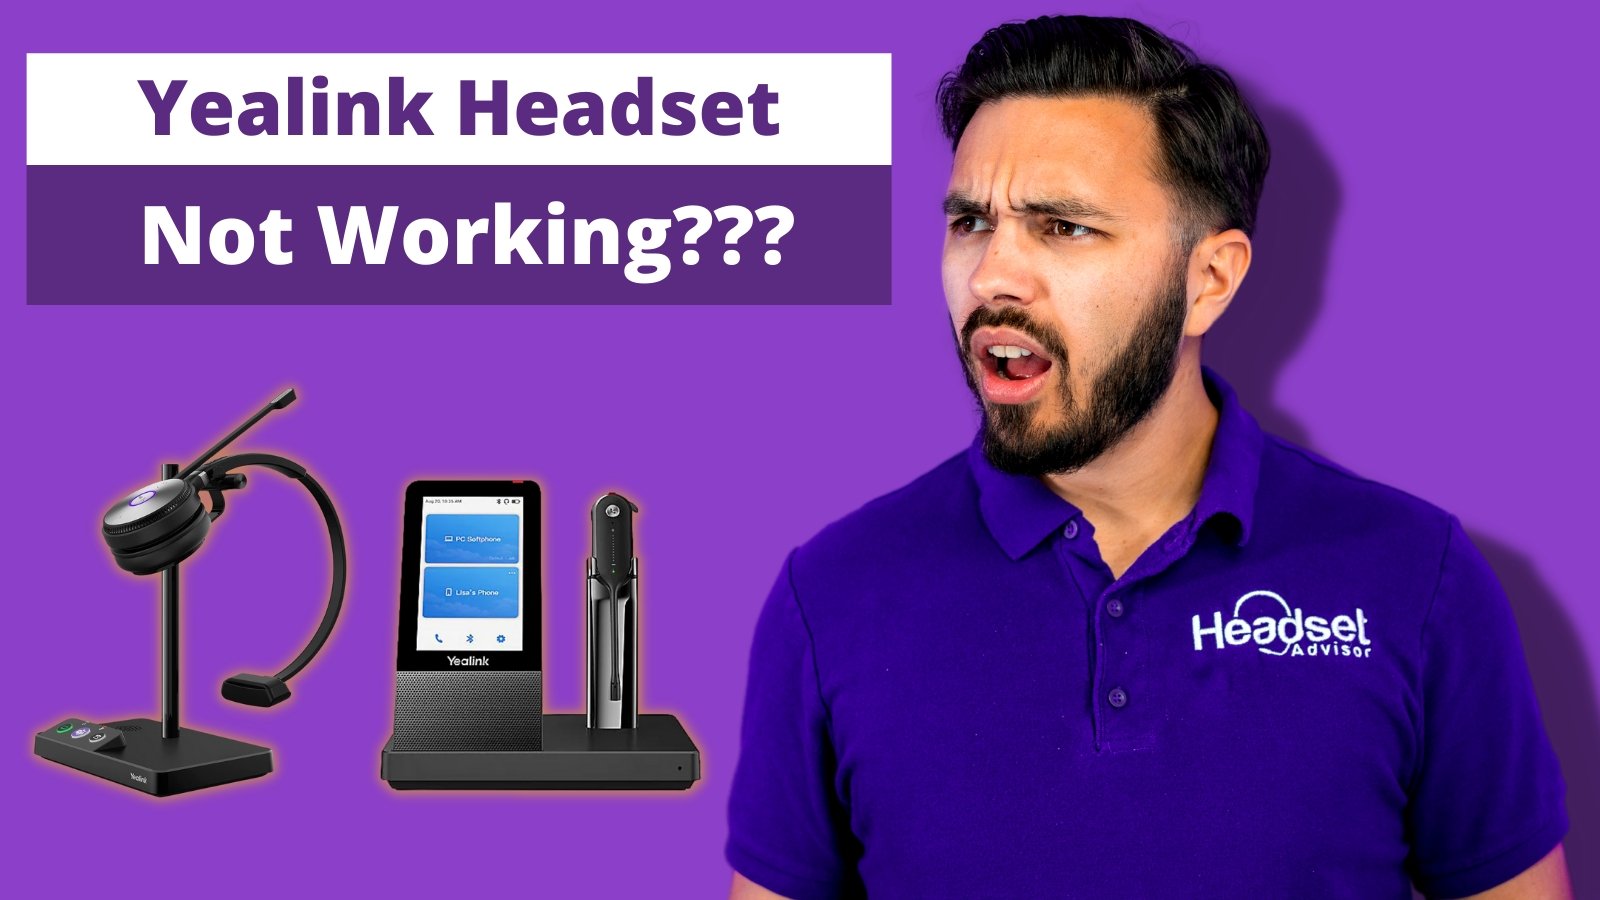 Yealink Headset Not Working On Desk Phone? Try This - Headset Advisor